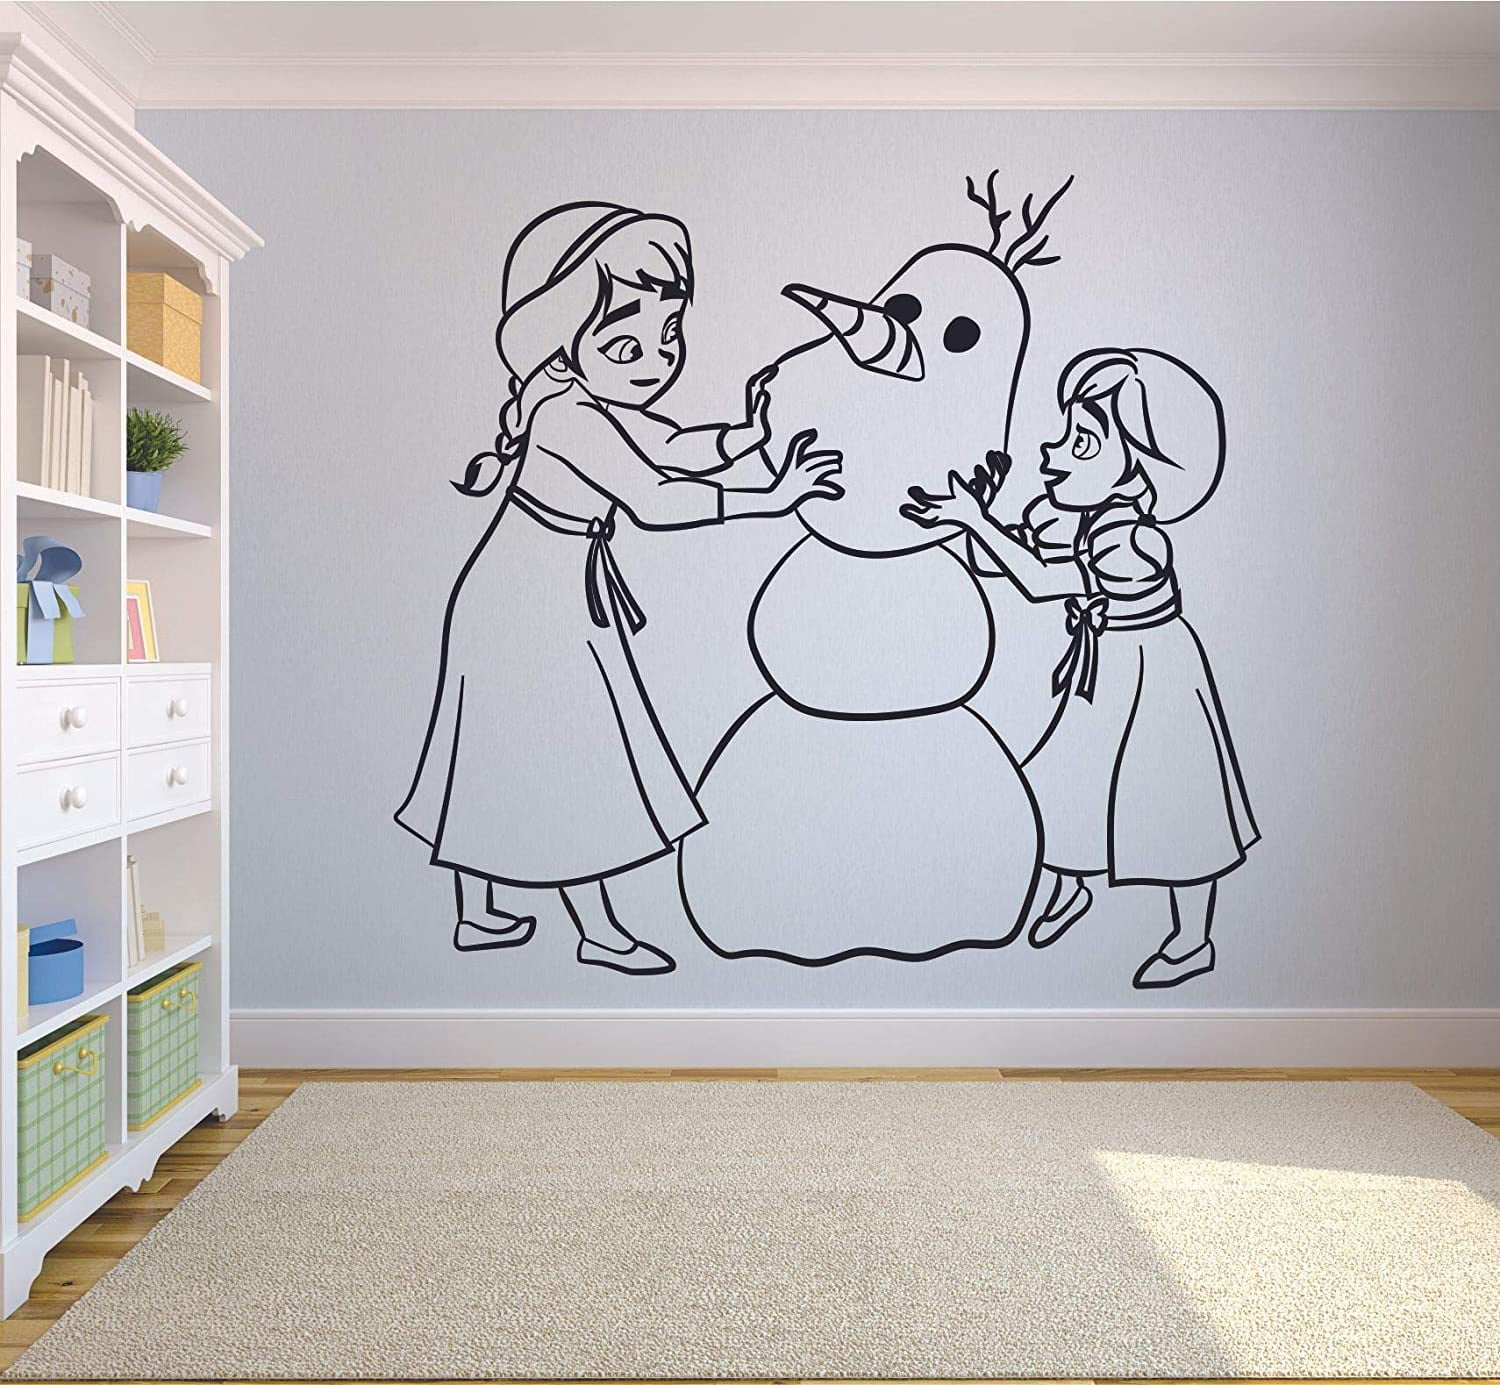 LARGE FROZEN WALL STICKERS ART ANNA AND ELSA KIDS BEDROOM 